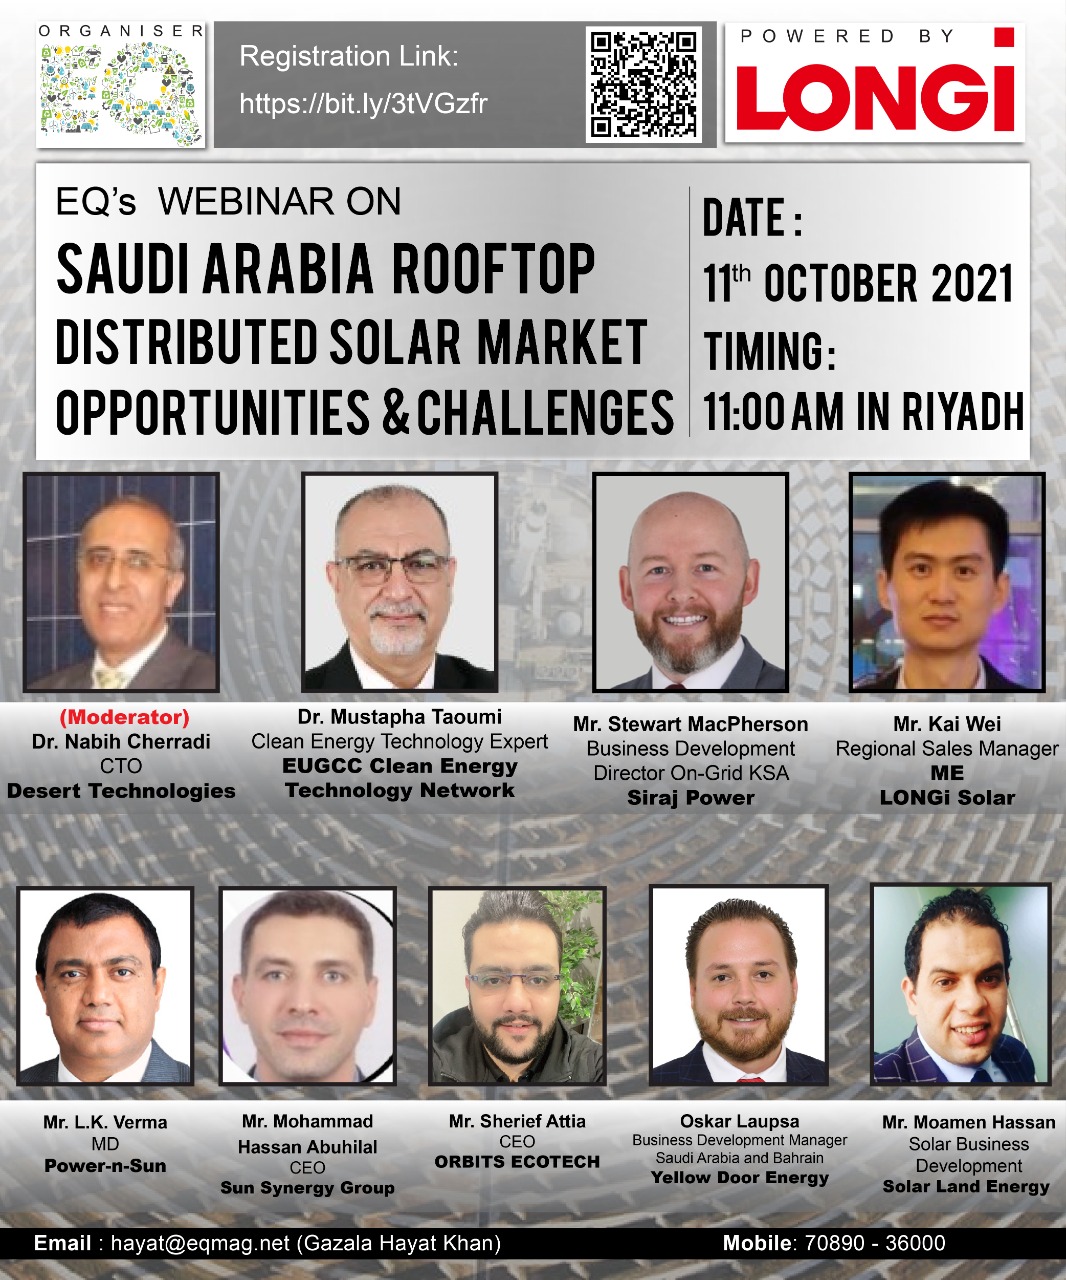 EQ Webinar on Saudi Arabia RoofTop / Distributed Solar Market Outlook Powered by LONGi – On Monday October 11th From 11:00 AM Onwards…. Register Now !!!